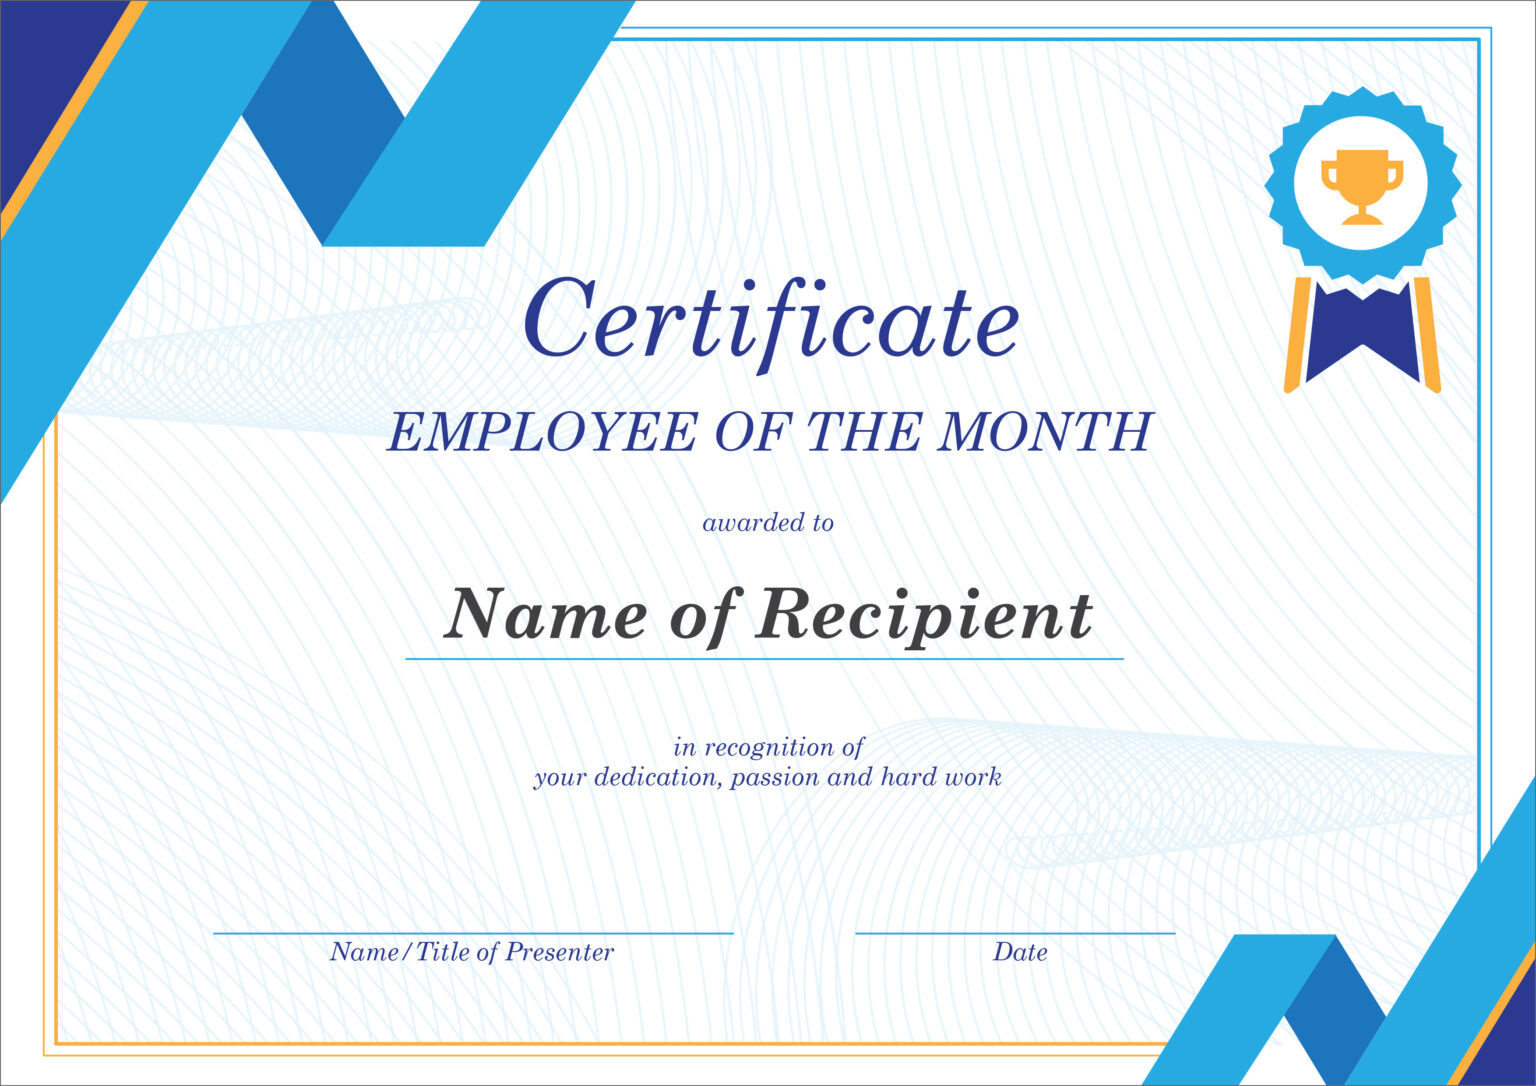 certificate-design-psd-files-free-download-placespag